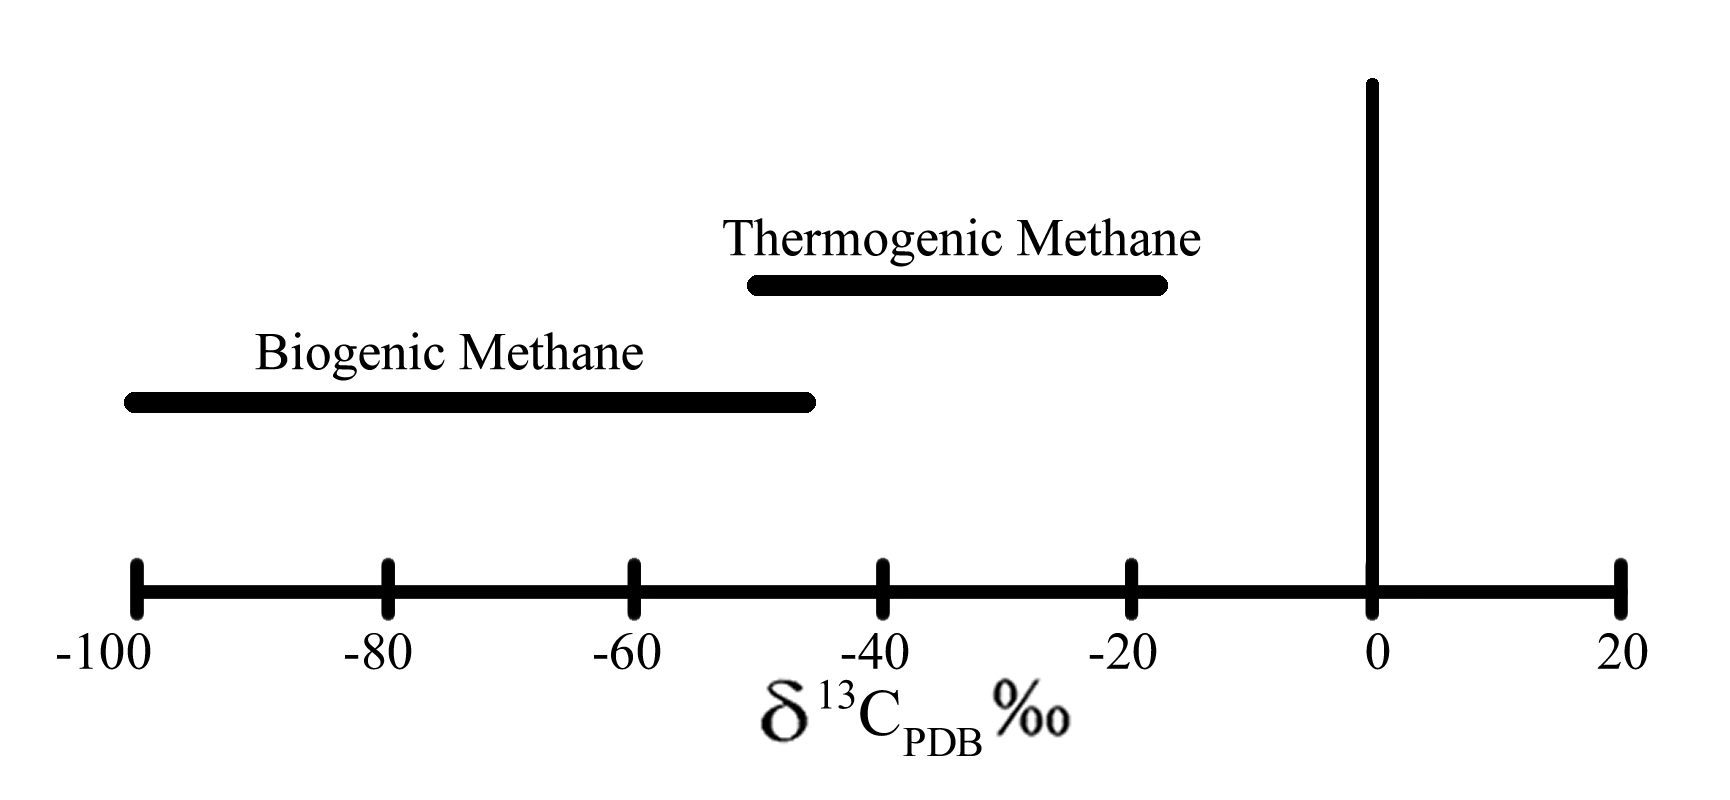 Graph showing the difference between Biogenic and Thermogenic Methane isotope ratios